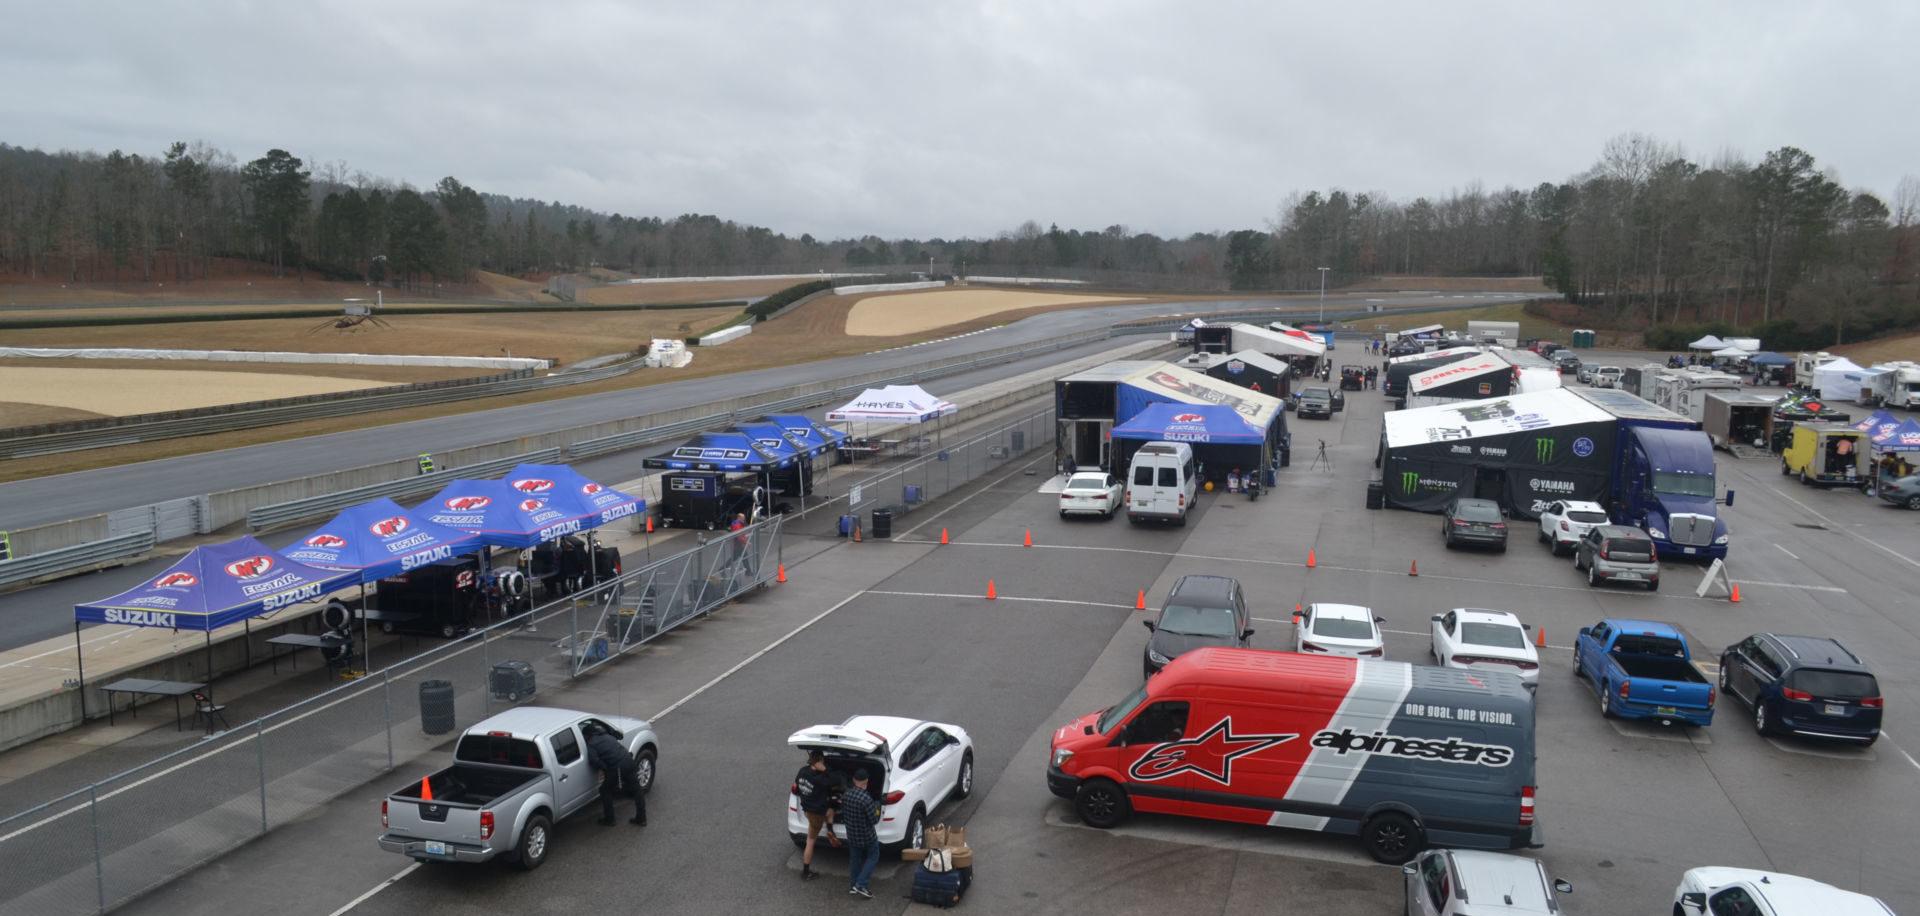 The paddock on Day Two of the official MotoAmerica pre-season test at Barber Motorsports Park. Photo by David Swarts.